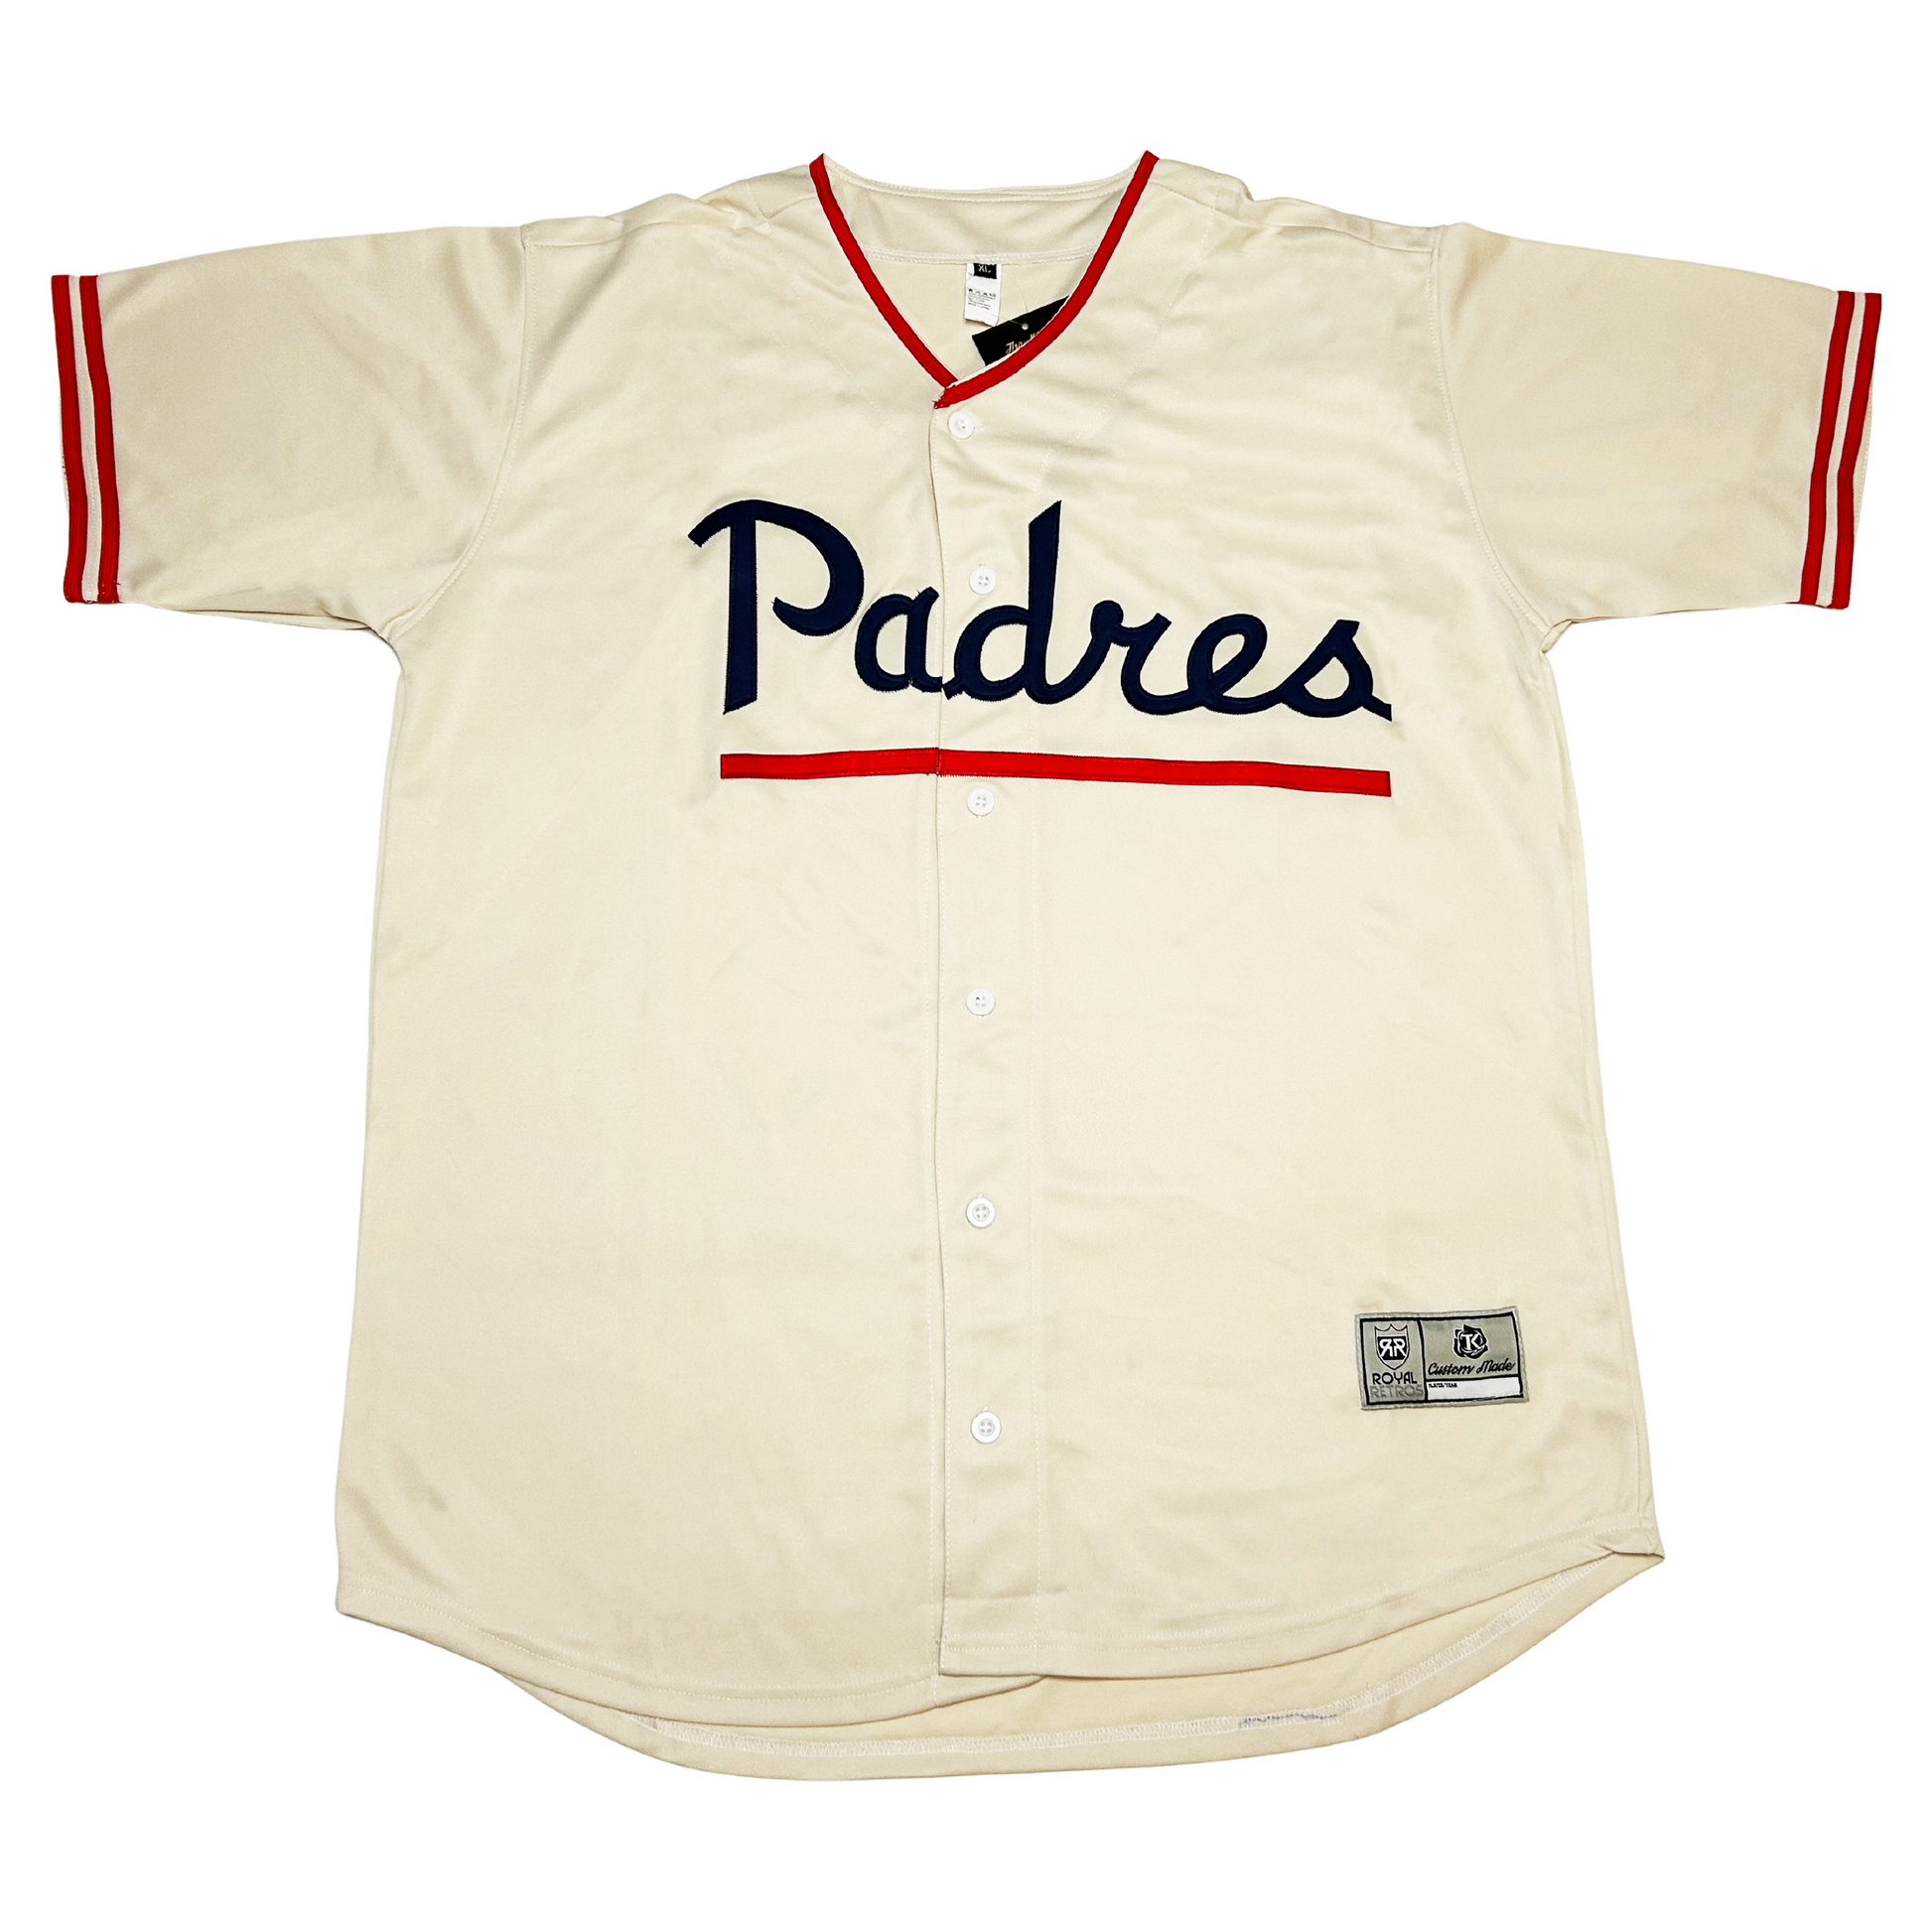 PCL Padres Uniforms: Bring back theblue & red? : r/Padres